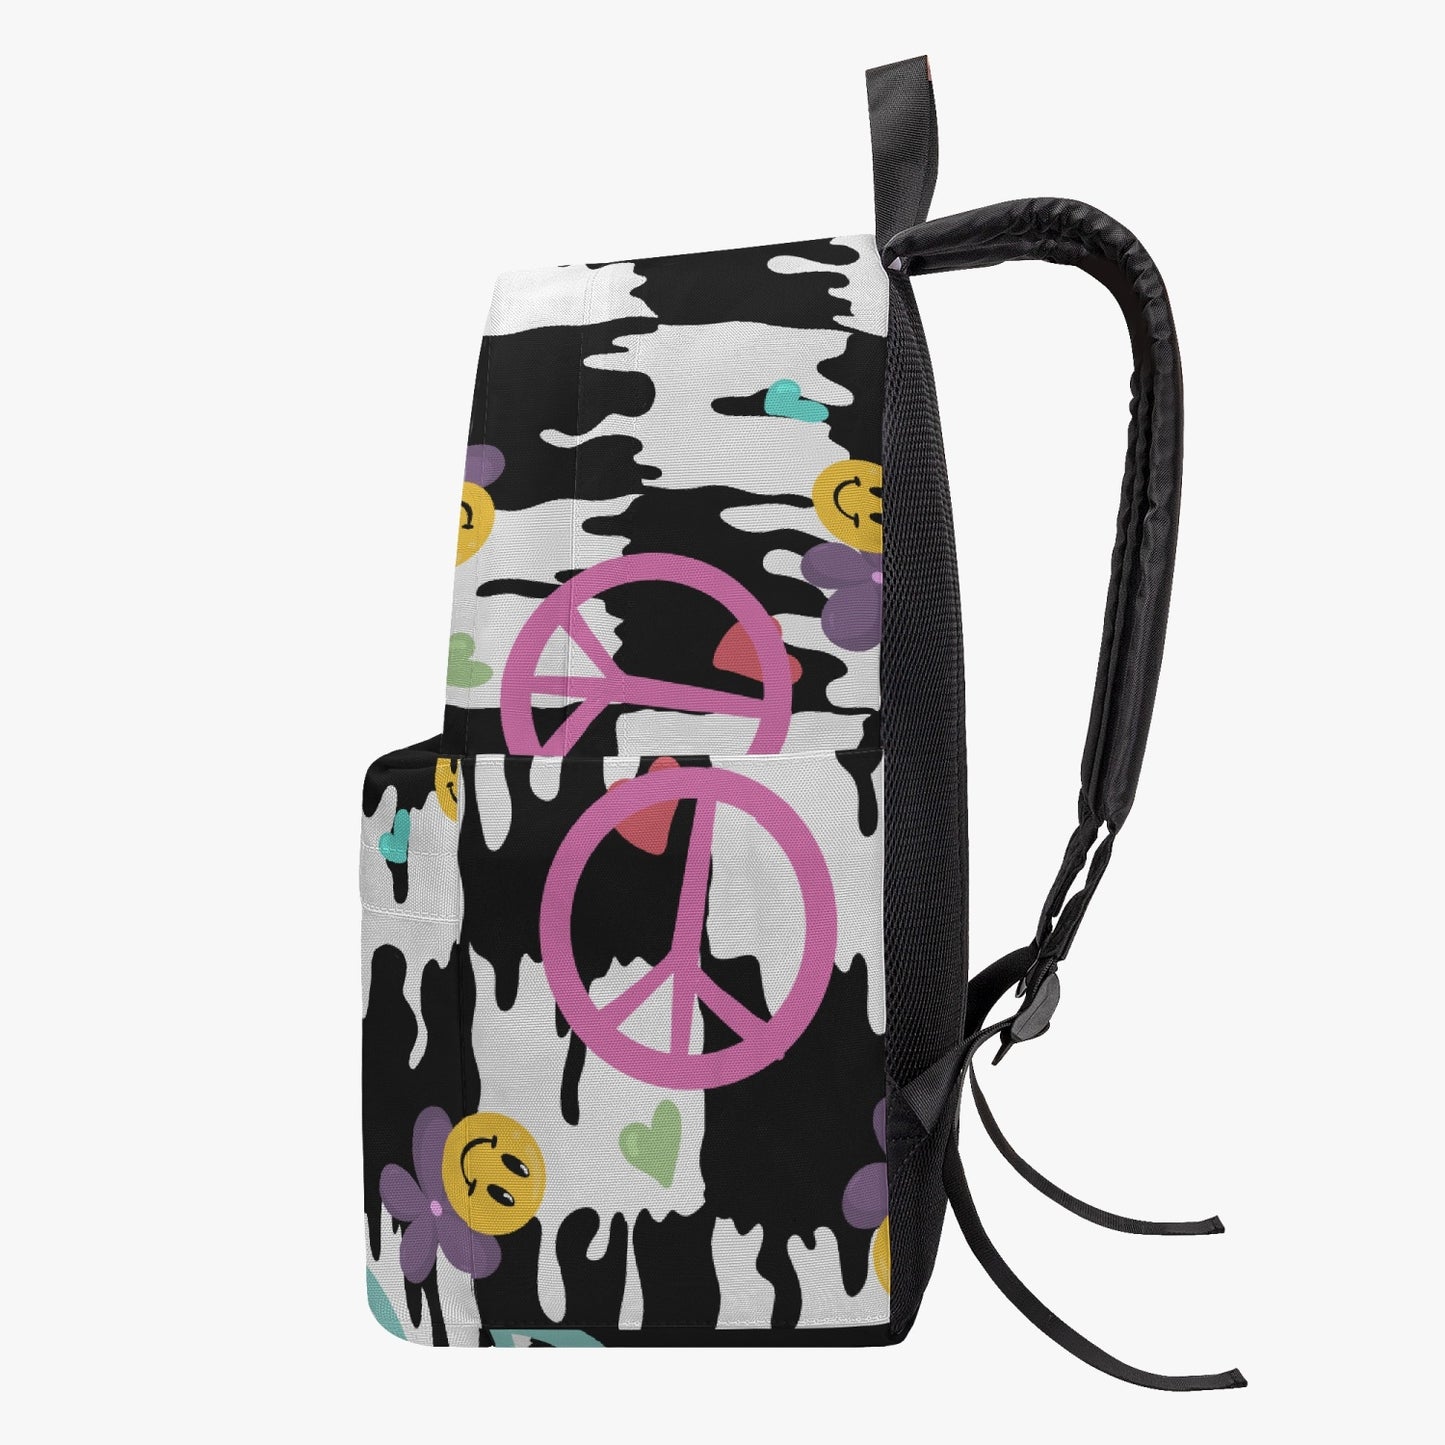 Psychedelic Smiley Backpack